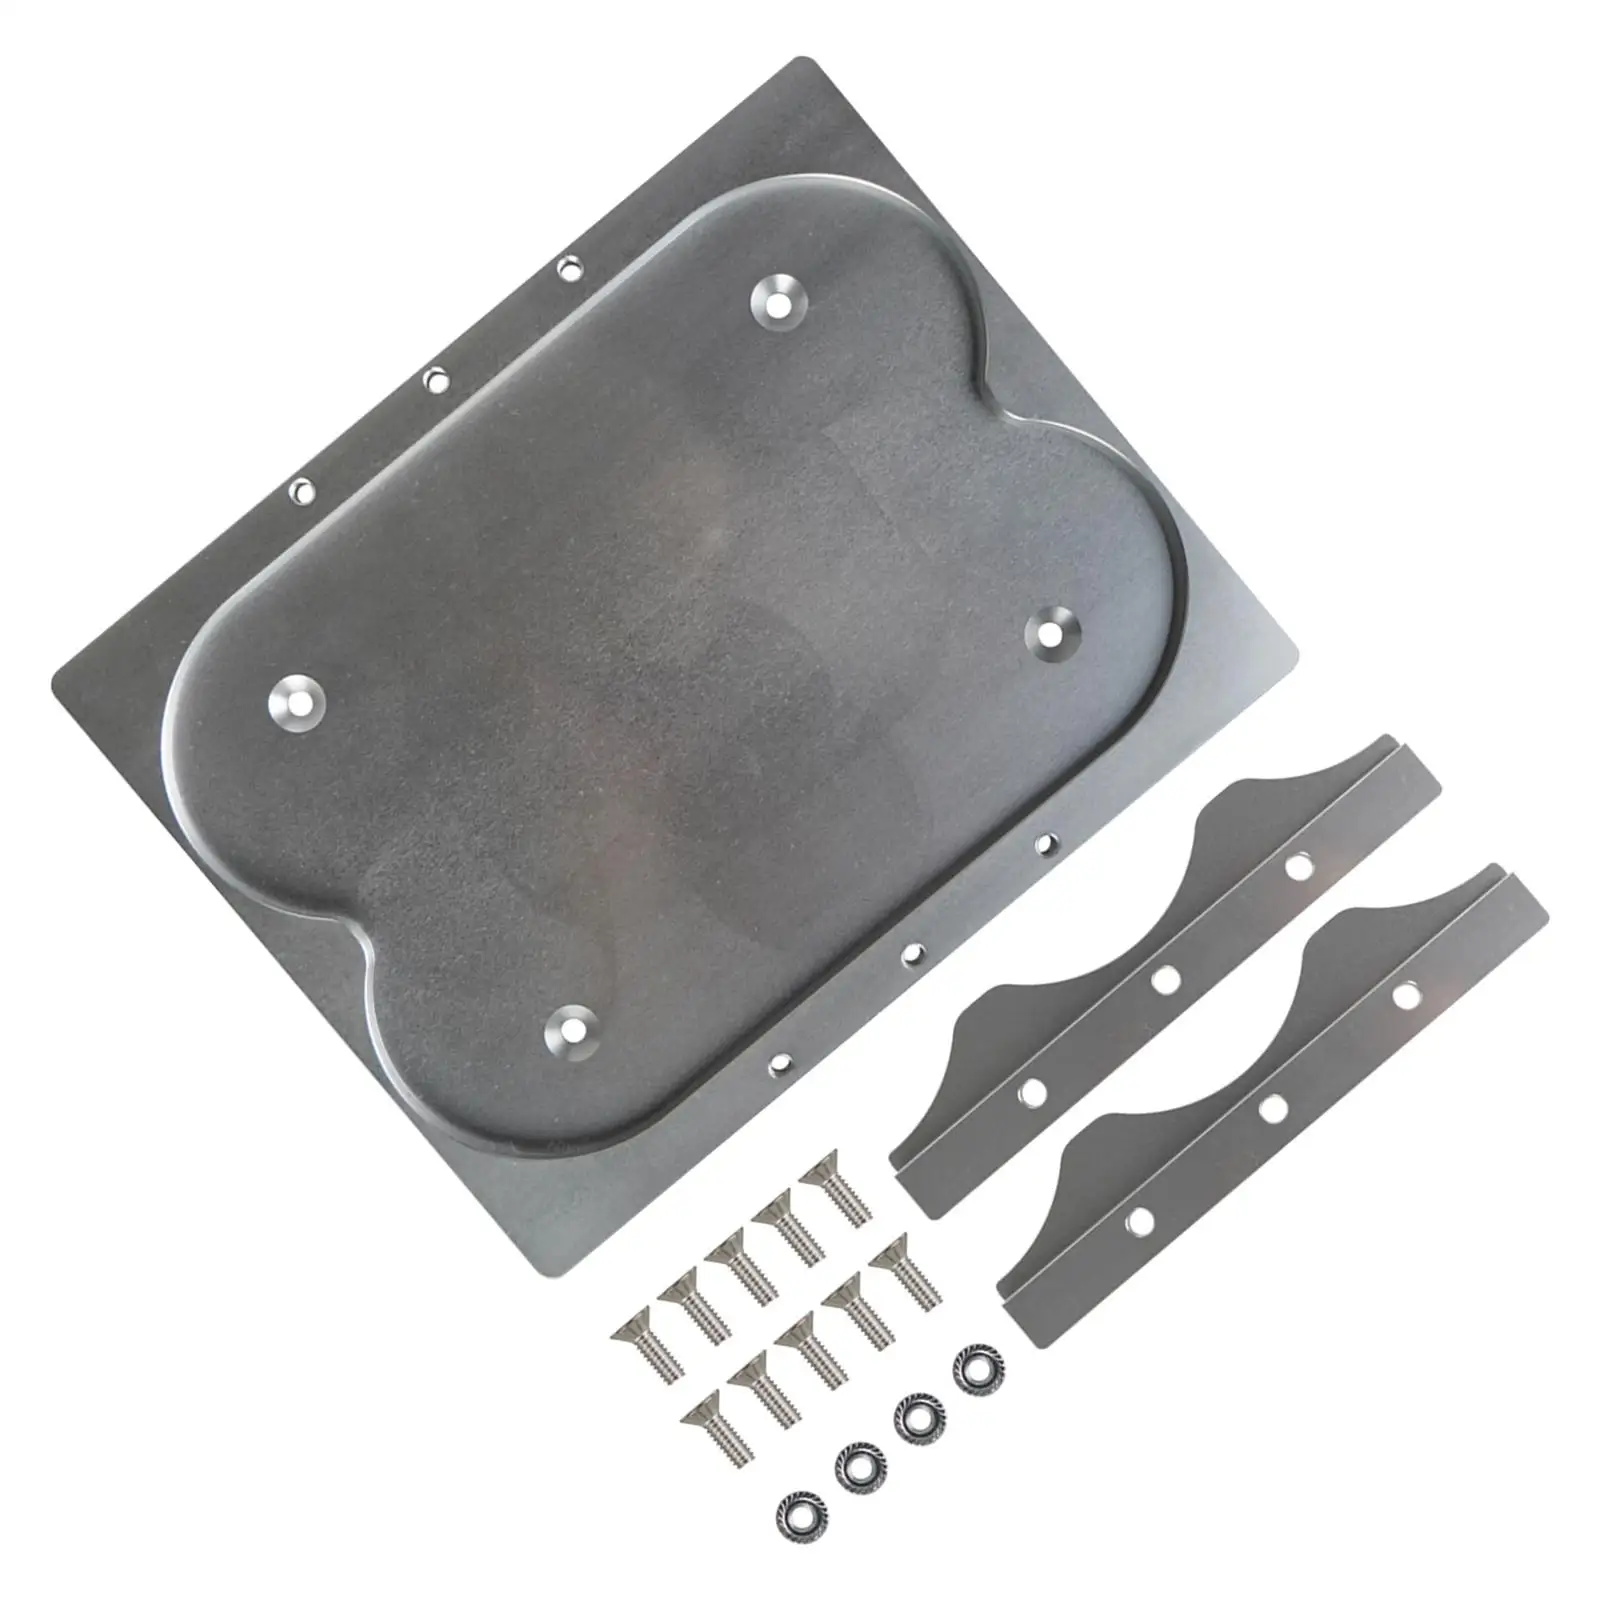 Battery Tray Replacement, Battery Pallet, Battery Hold Down Bracket Clamps Kit